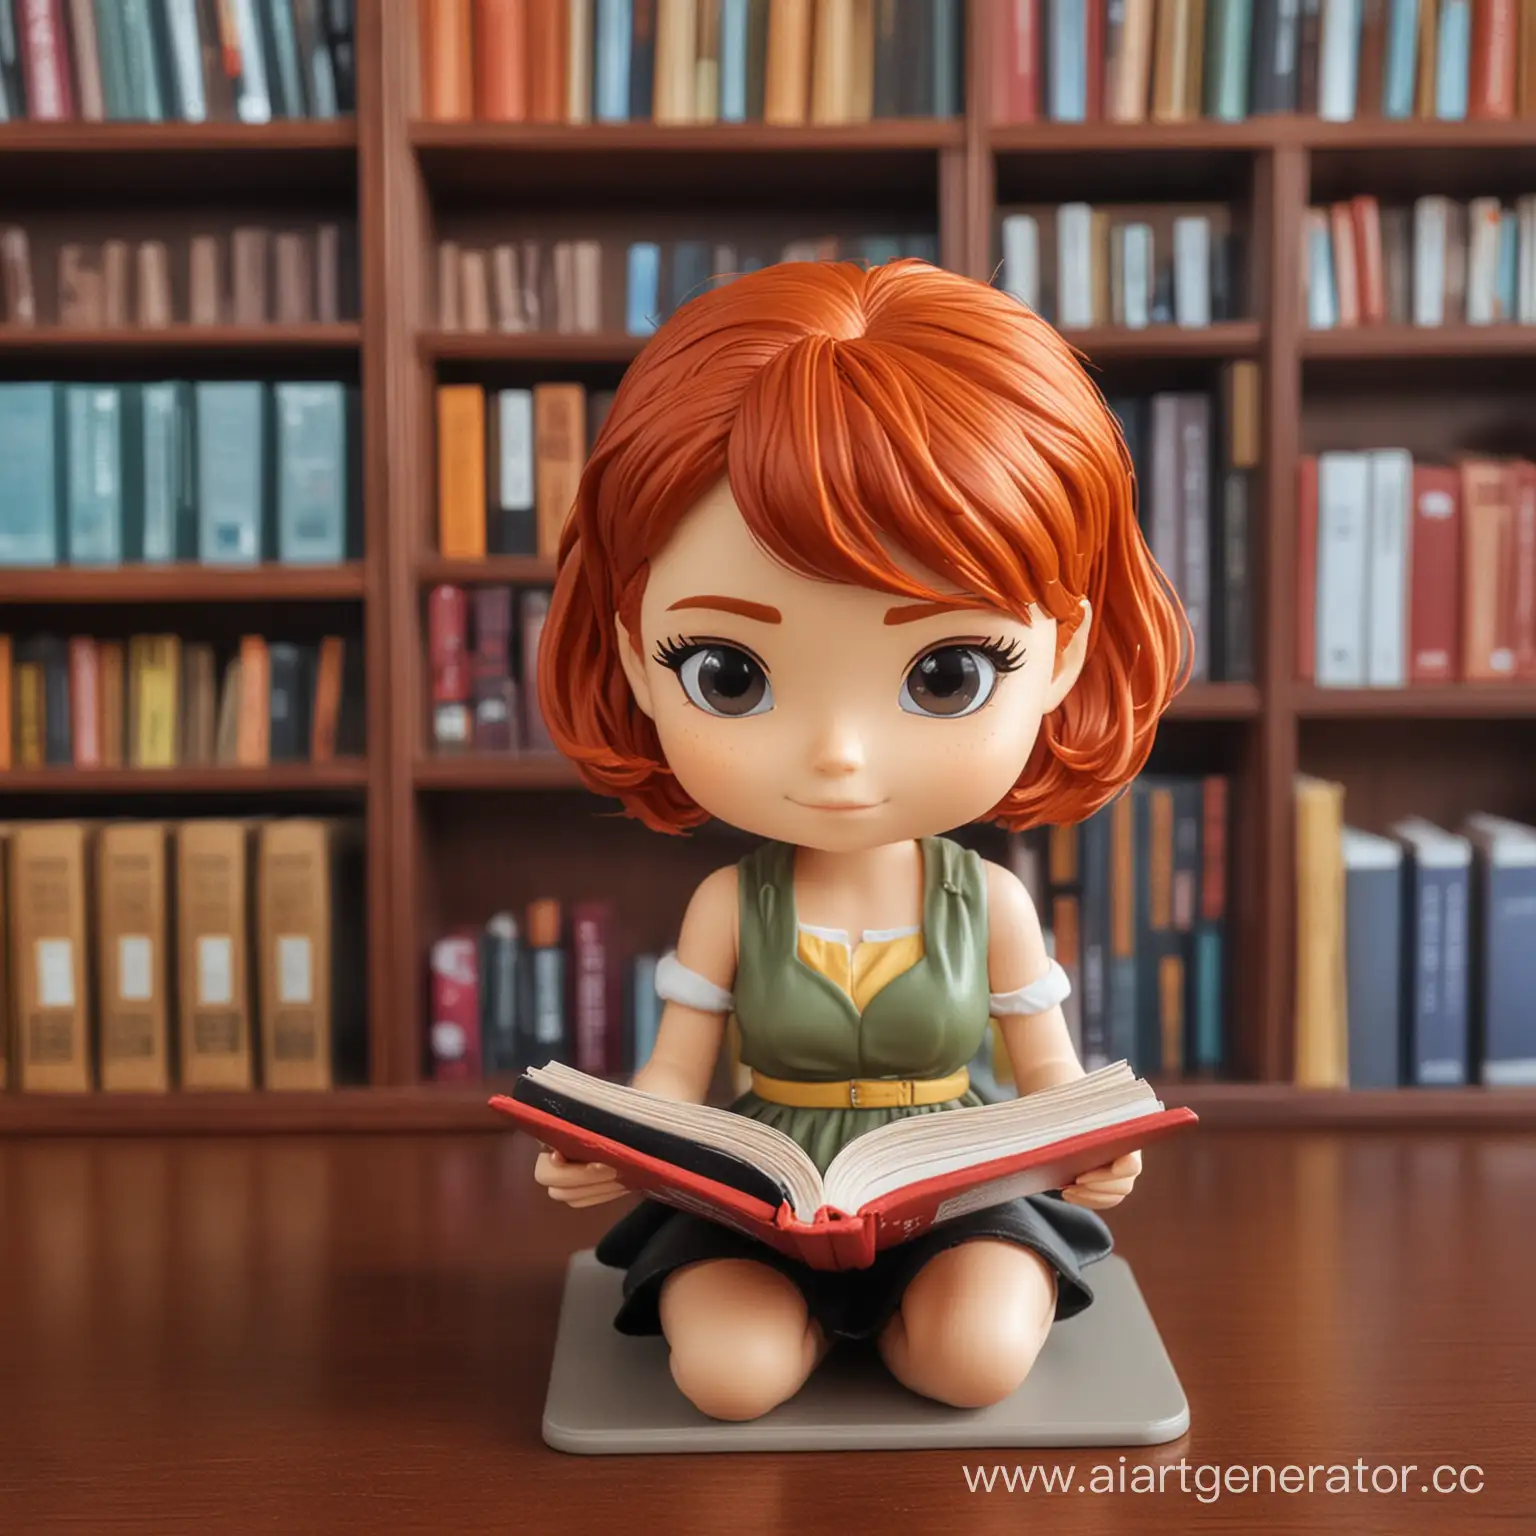 RedHaired-Girl-Reading-Book-Surrounded-by-Funko-Figures-in-Library